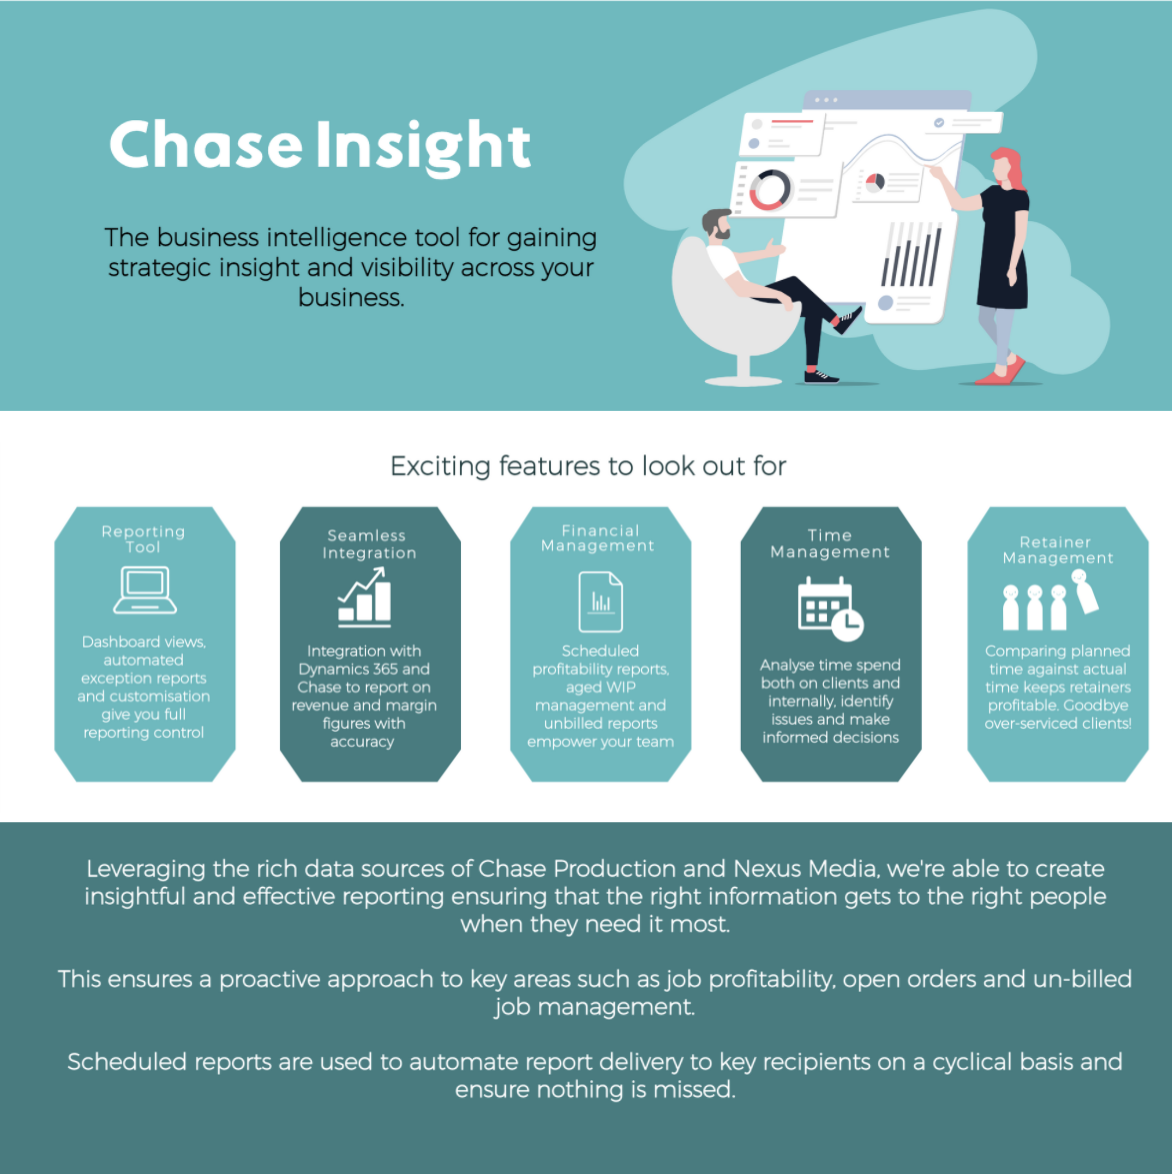 ?Leveraging the rich data sources of Chase Production and Nexus Media, we're able to create insightful and effective reporting ensuring that the right information gets to the right people when they need it most.